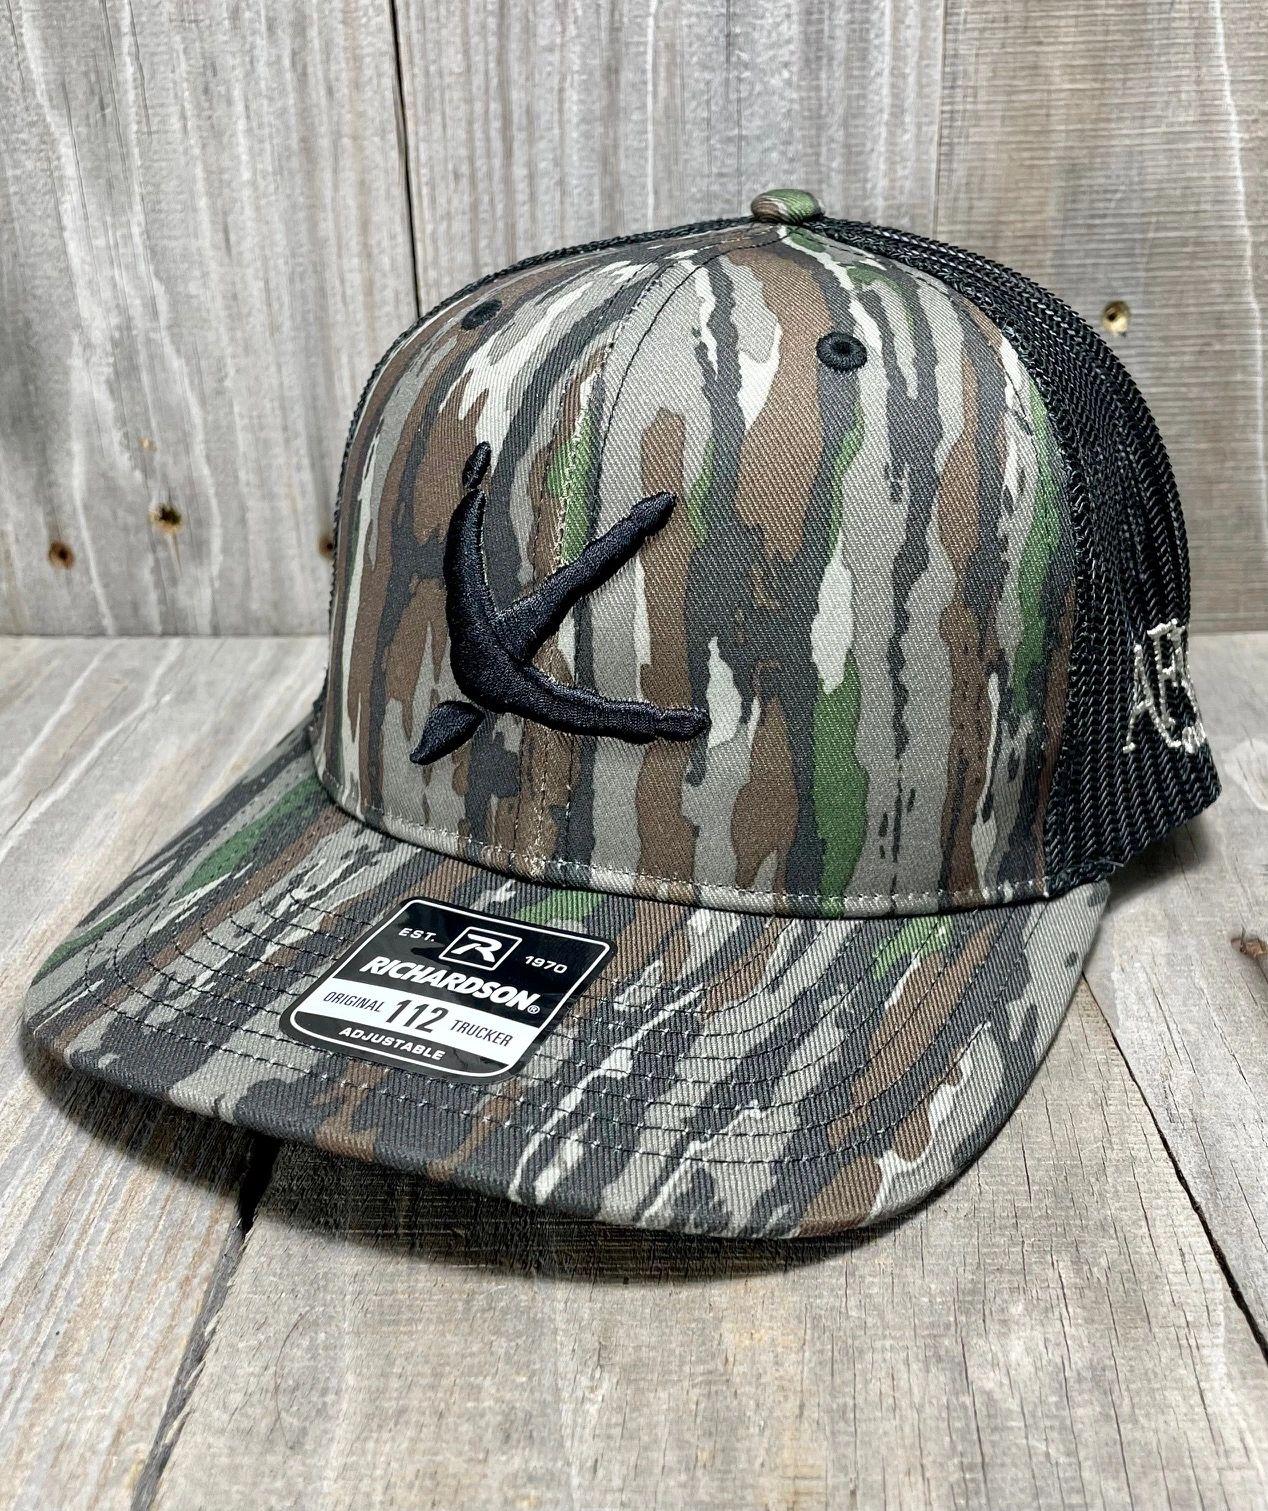 Realtree Xtra Green Camo Face Mask Hunting Hats for Indonesia